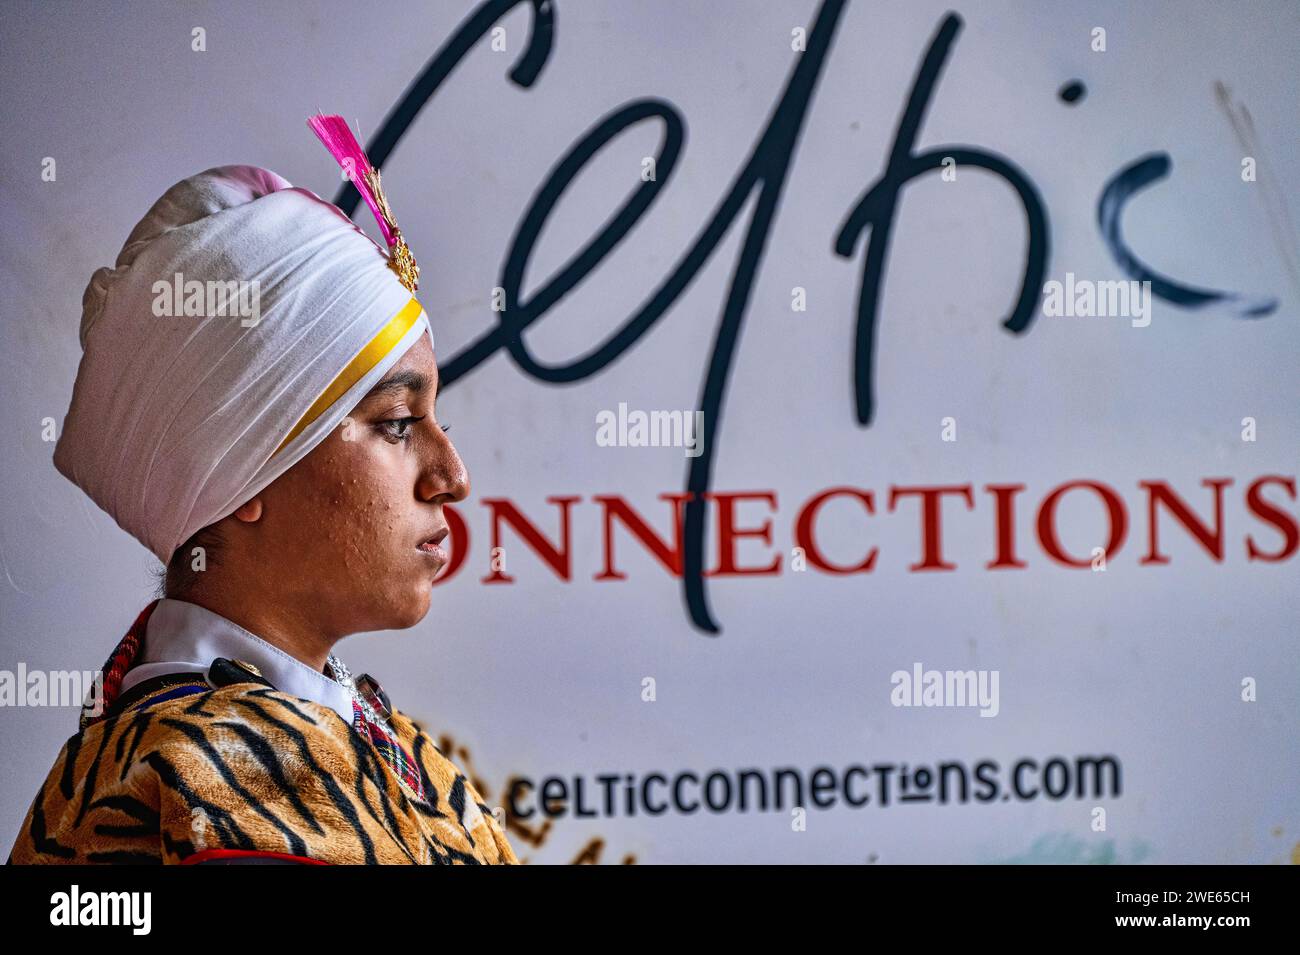 Female drummer from the Sri Dasmesh Malaysian Pipe Band takes a break in front of poster advertising Celtic Connections series ofconcerts. Stock Photo